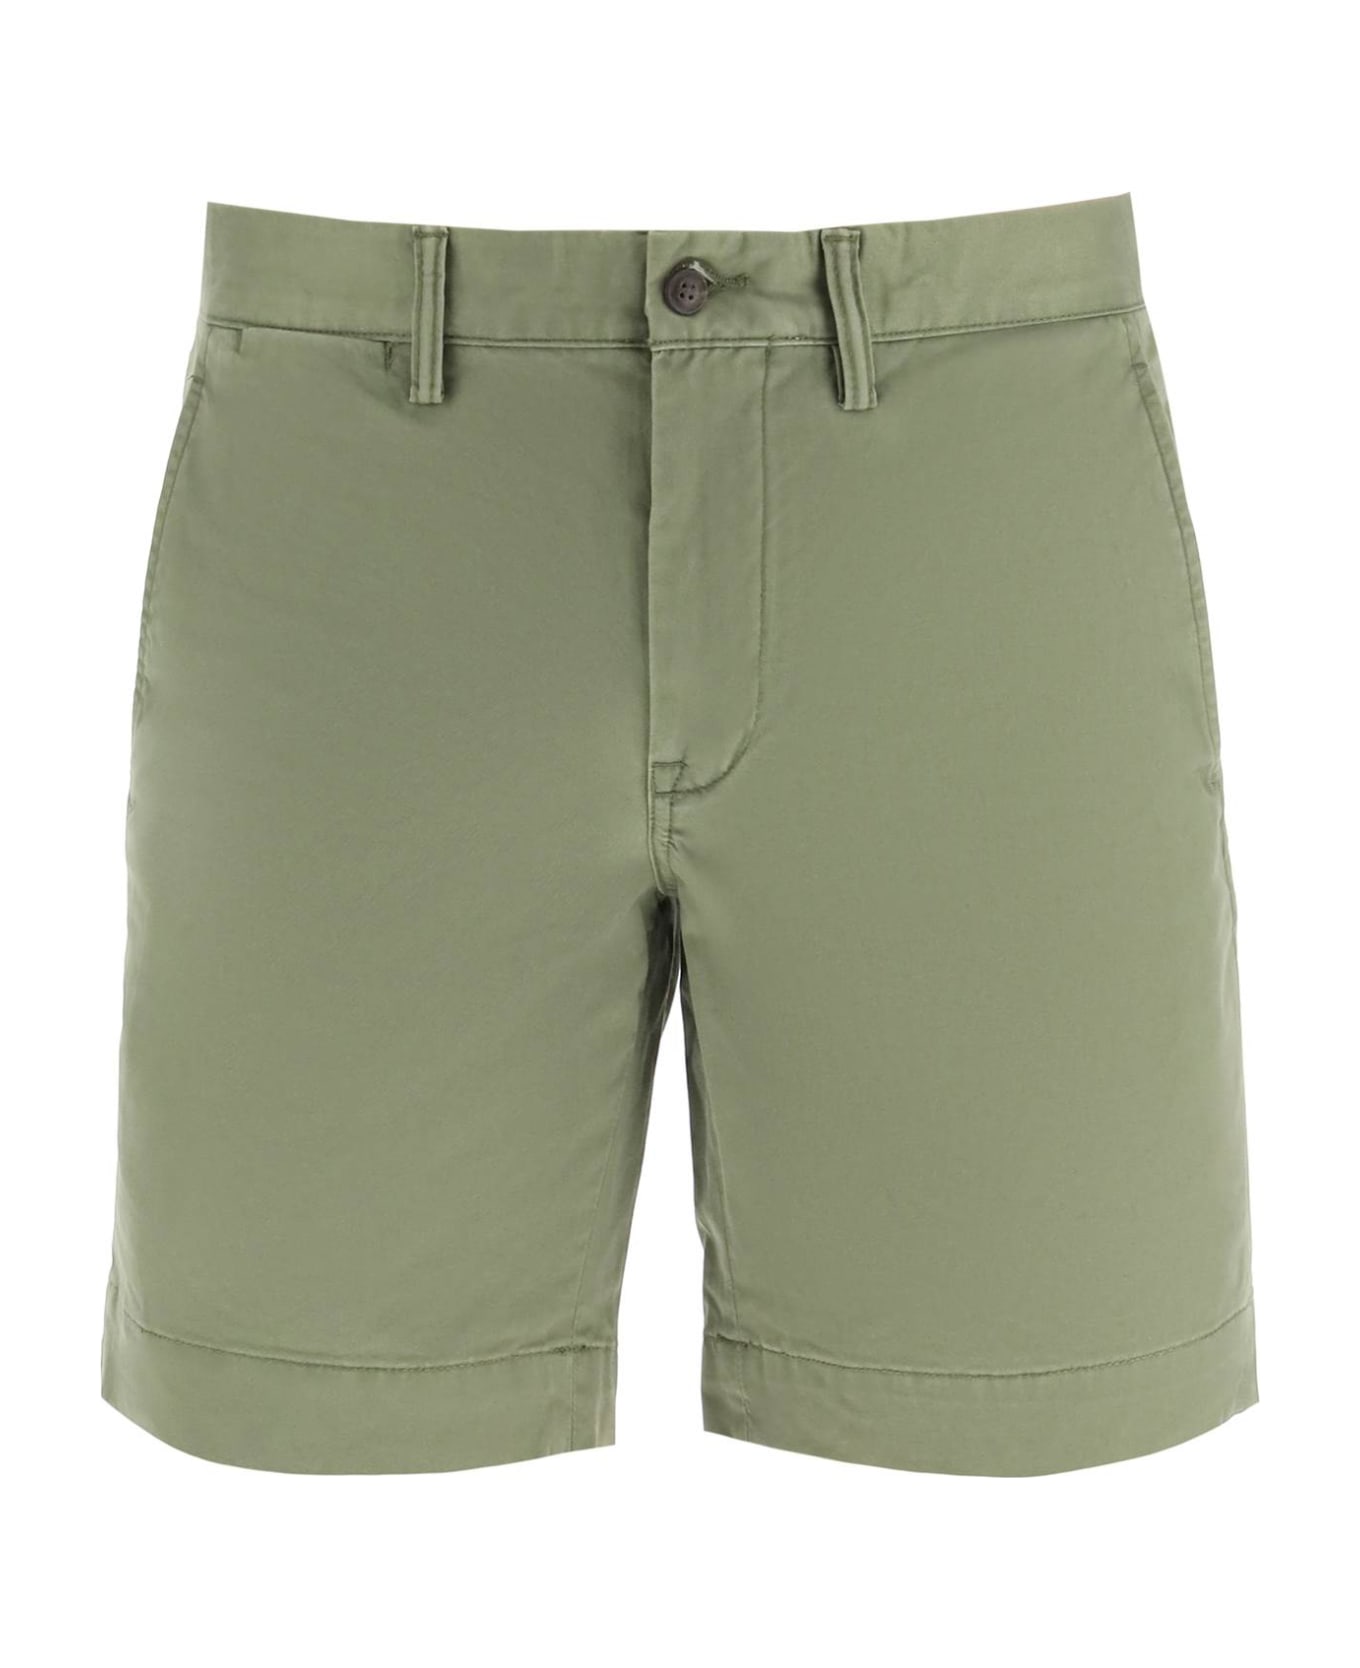 Polo Ralph Lauren Stretch Chino Shorts - ARMY OLIVE (Green)